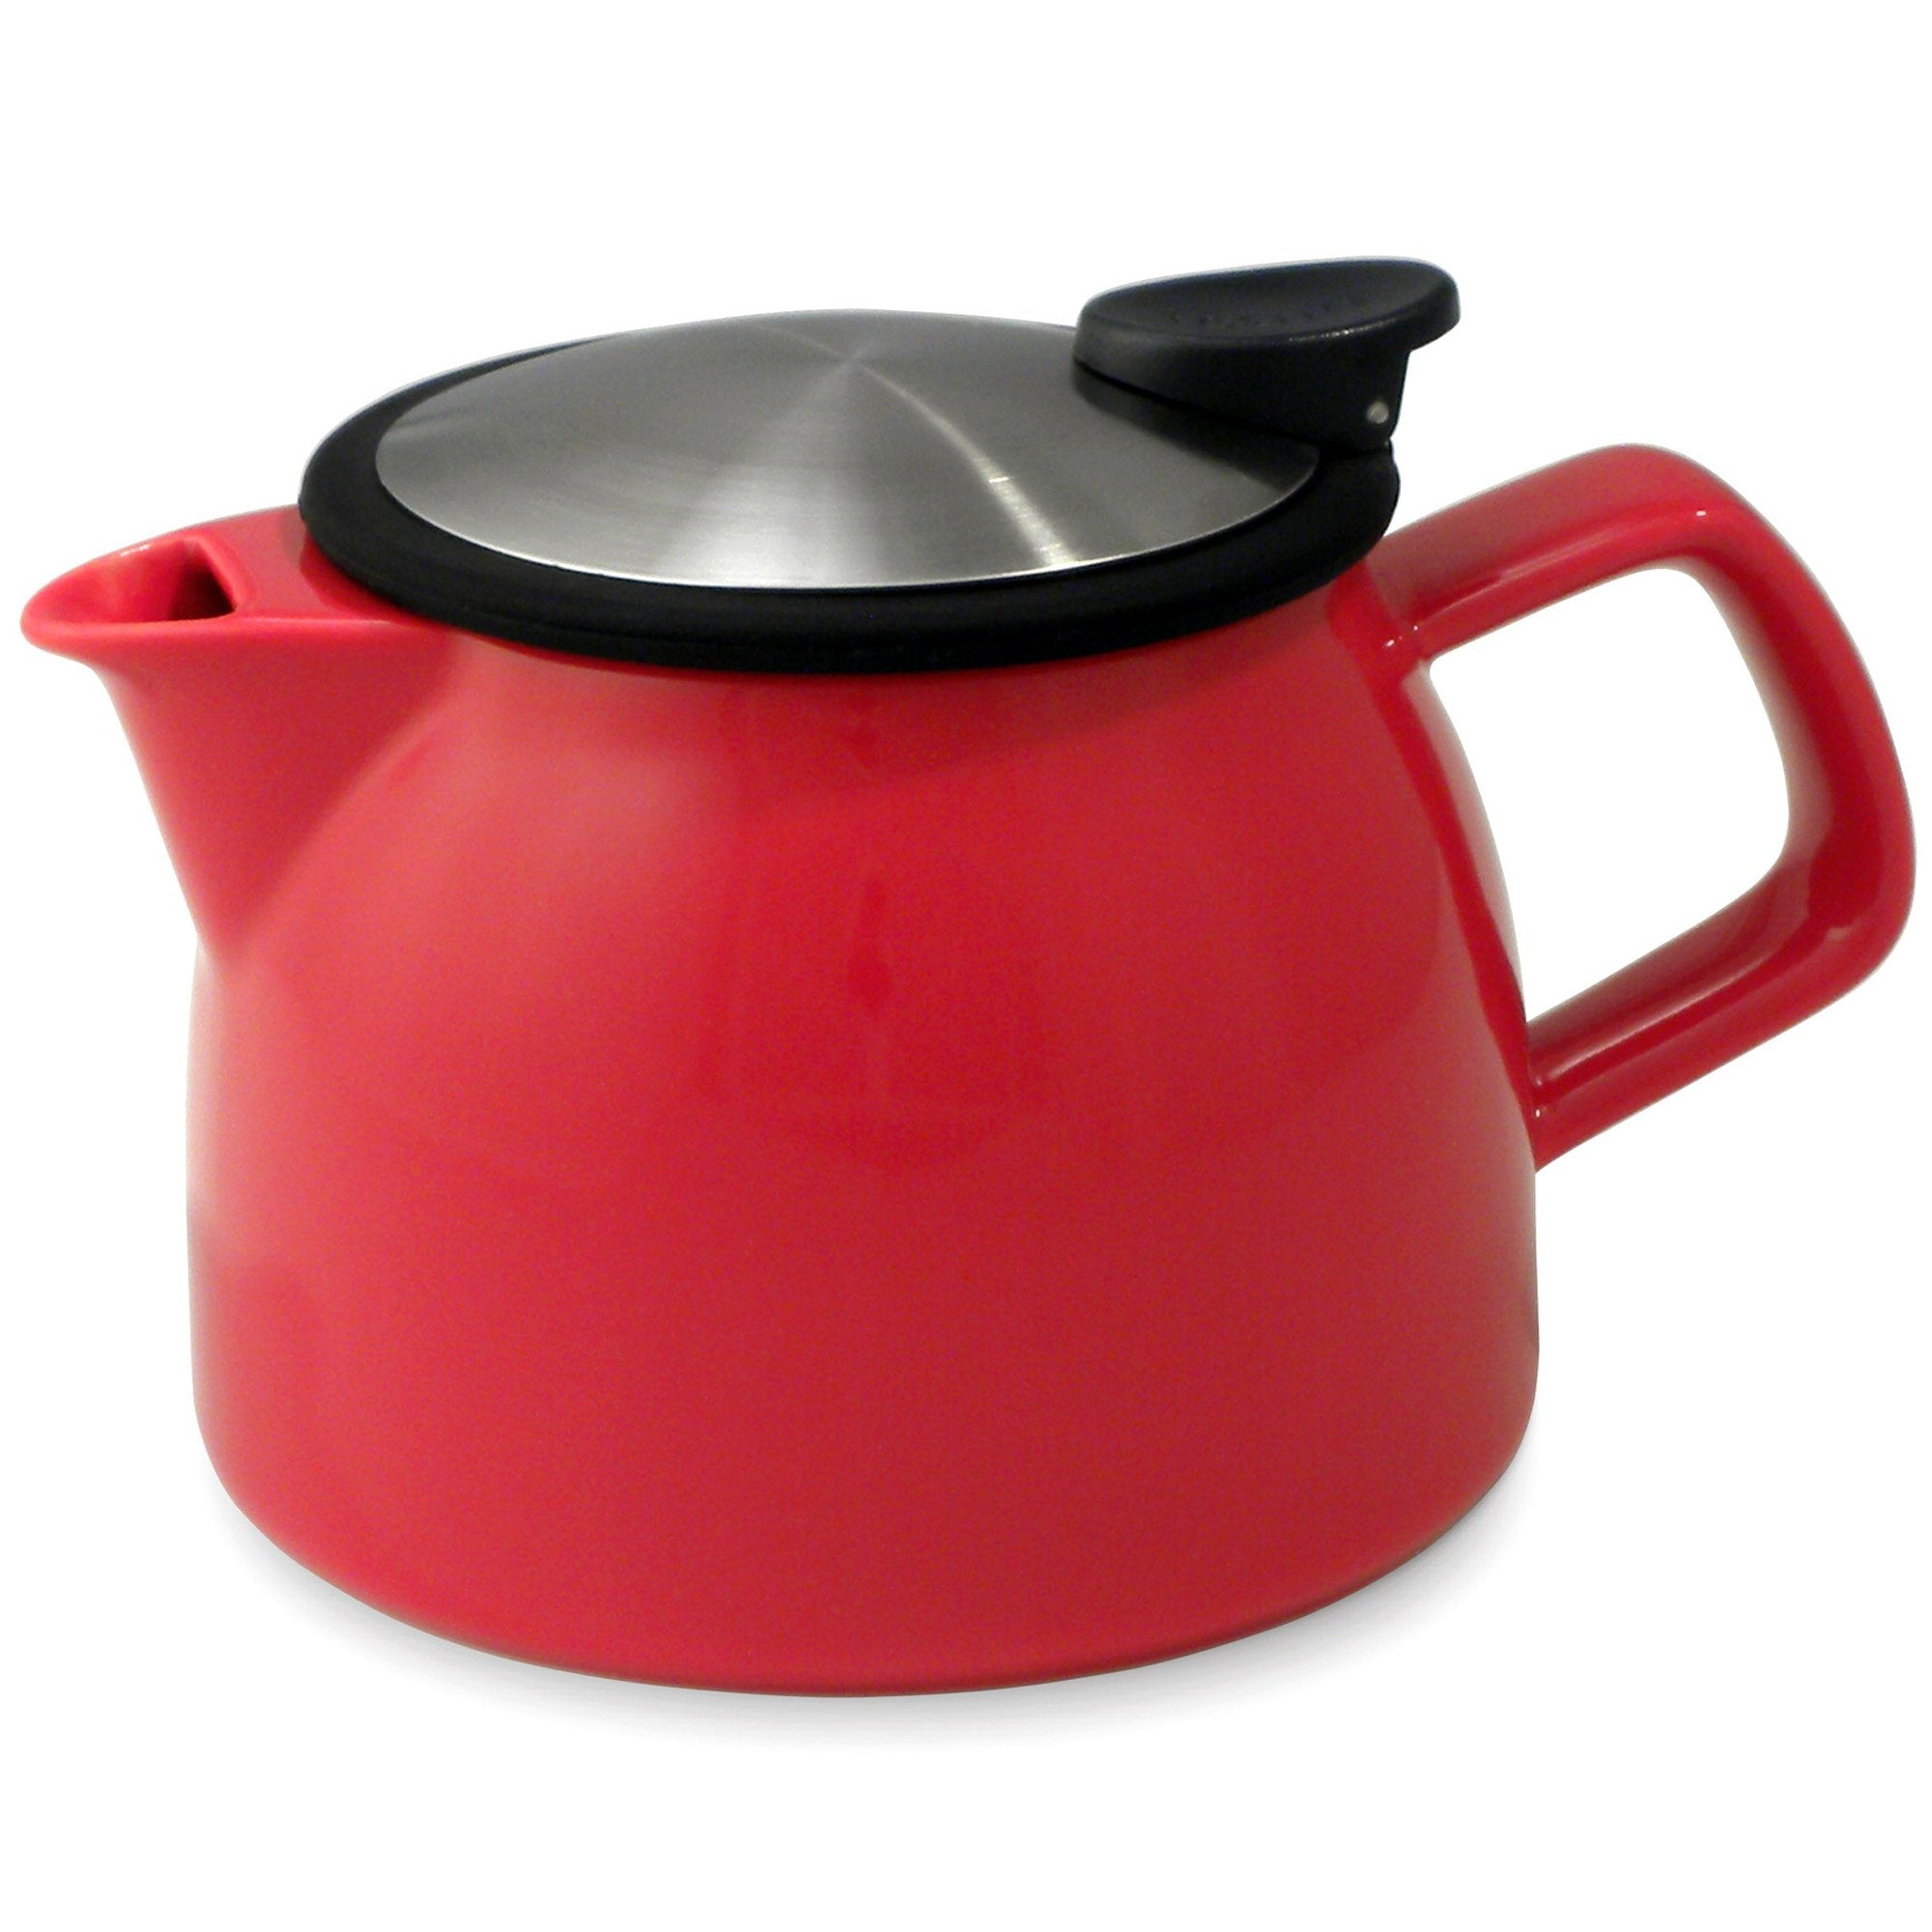 Tealula 16 oz bell-shaped Red teapot with square handle and black and silver detachable push-on-lid